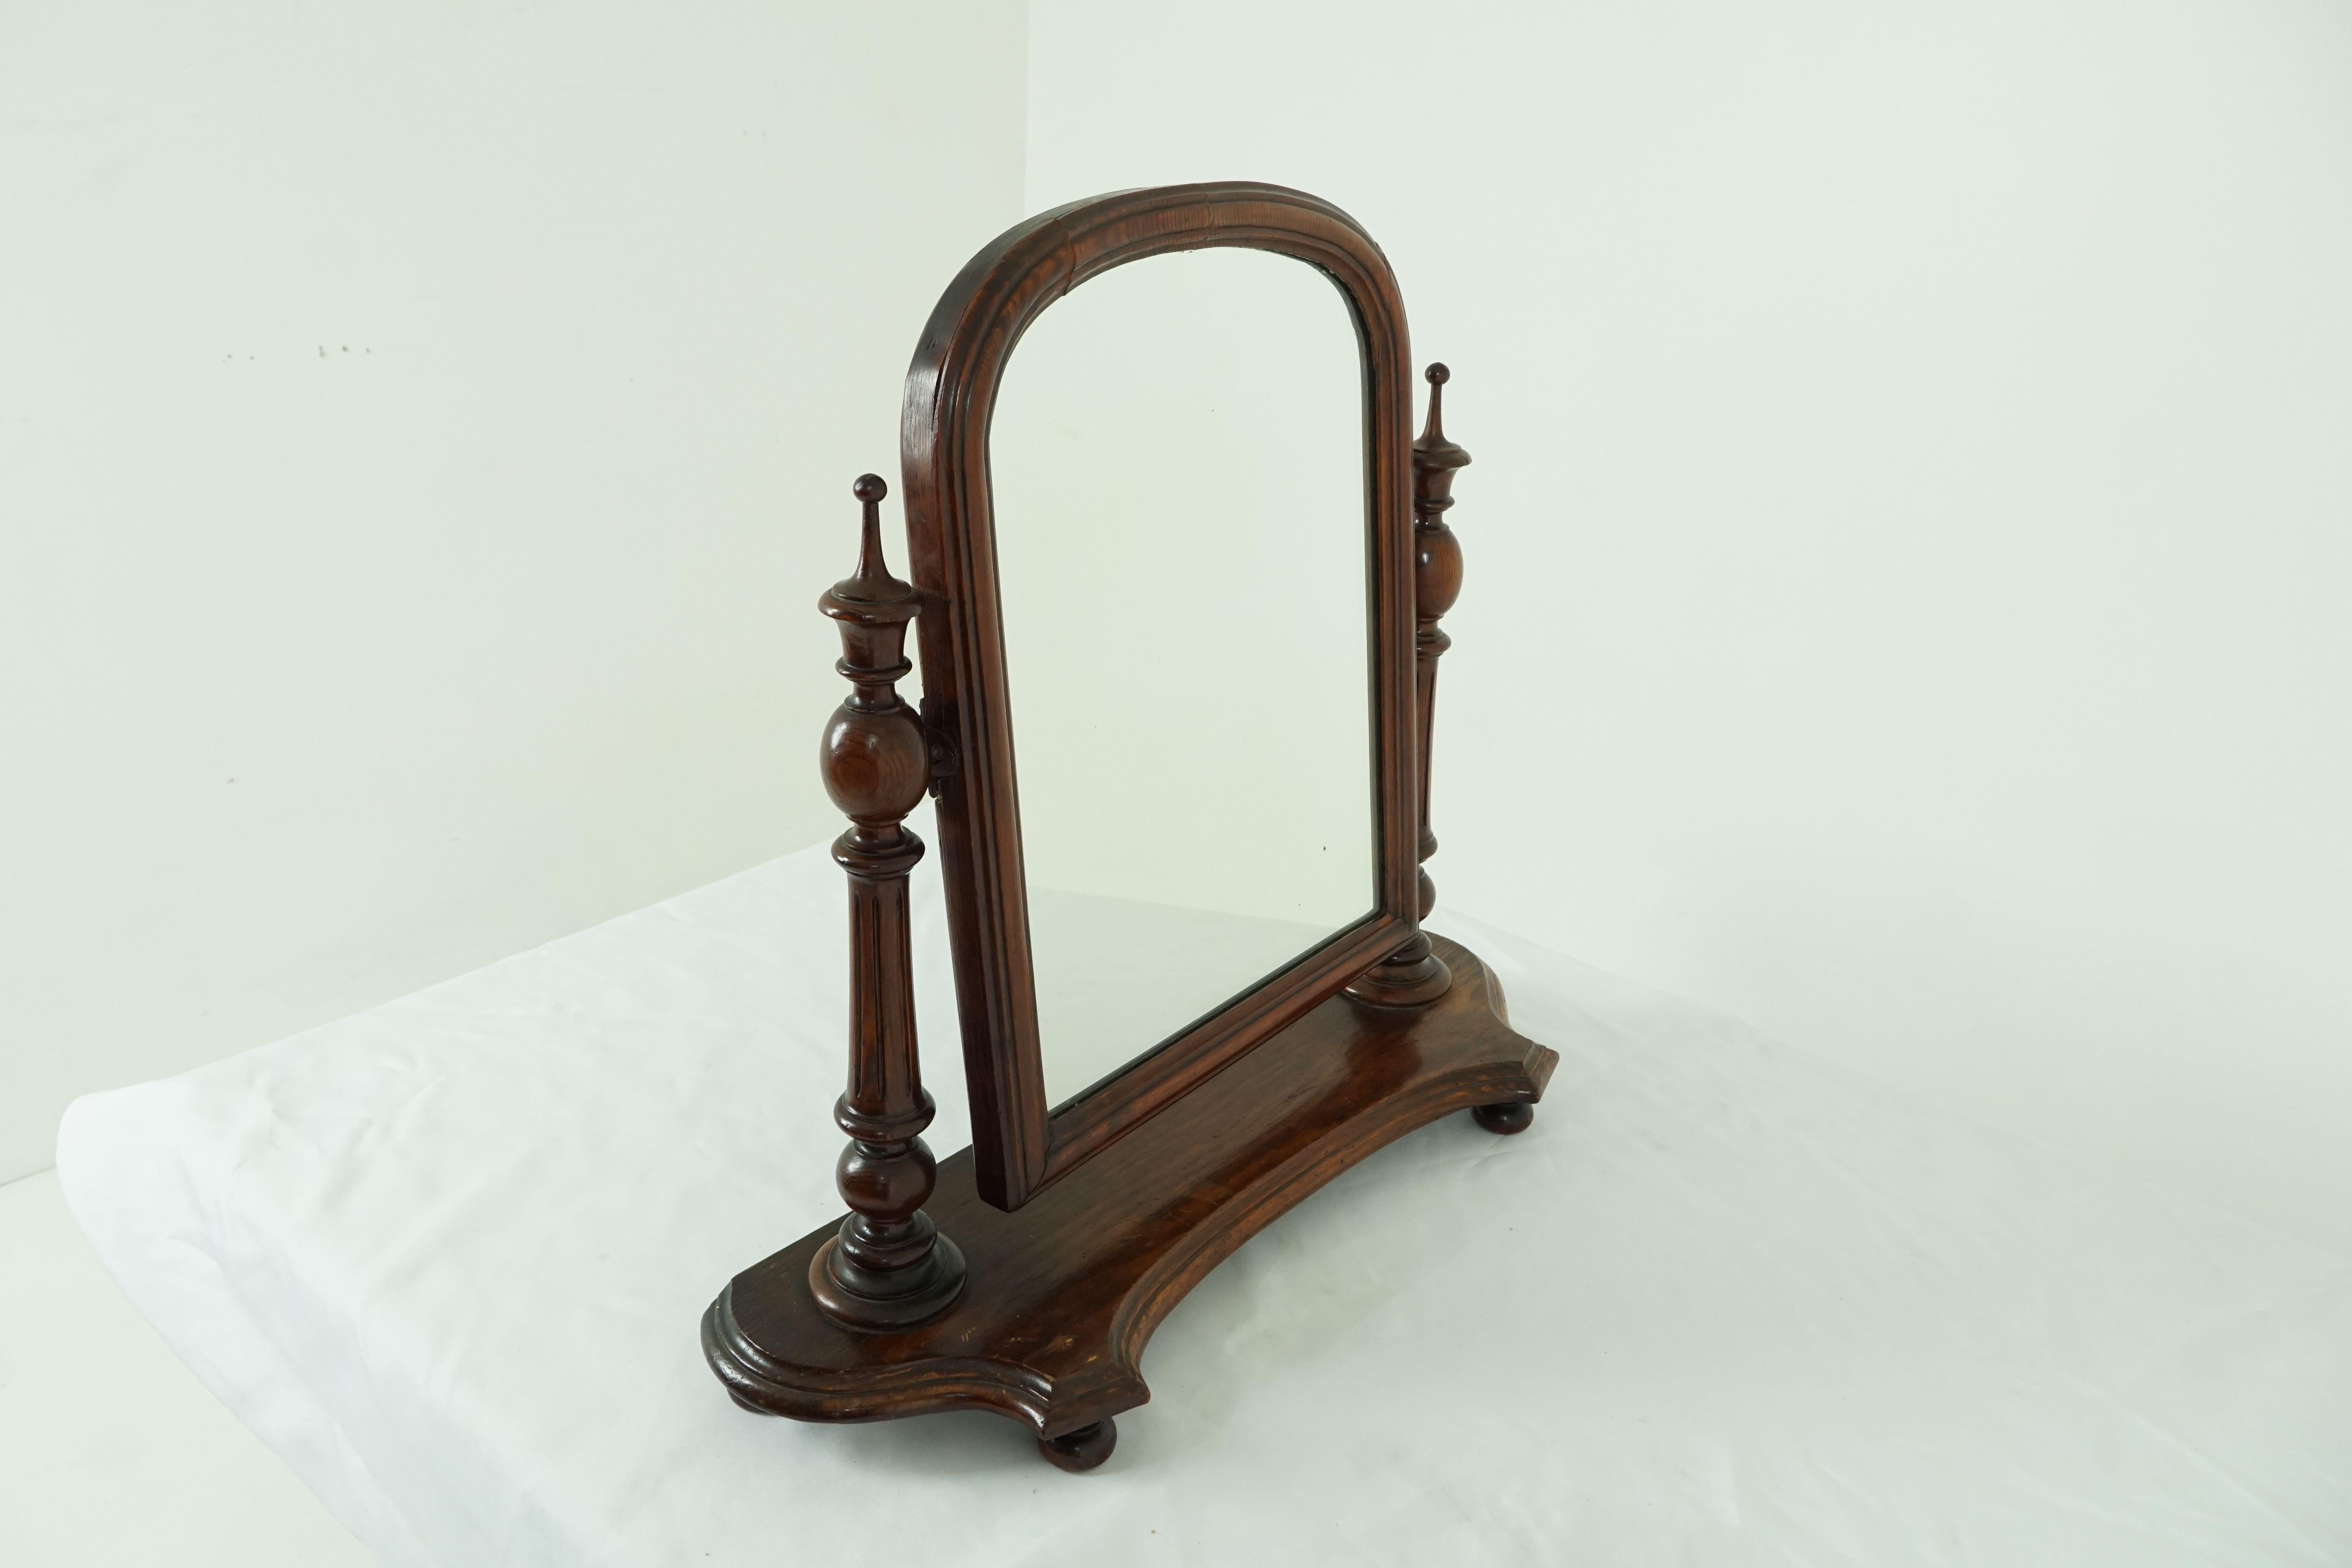 Antique Victorian pitch pine dressing table mirror on stand, antique furniture, Scotland, 1870, 1774

Scotland 1870
Solid pitch pine
Original finish
Dome top framed mirror
Finely carved fluted supports
On a serpentine shaped base
And sitting